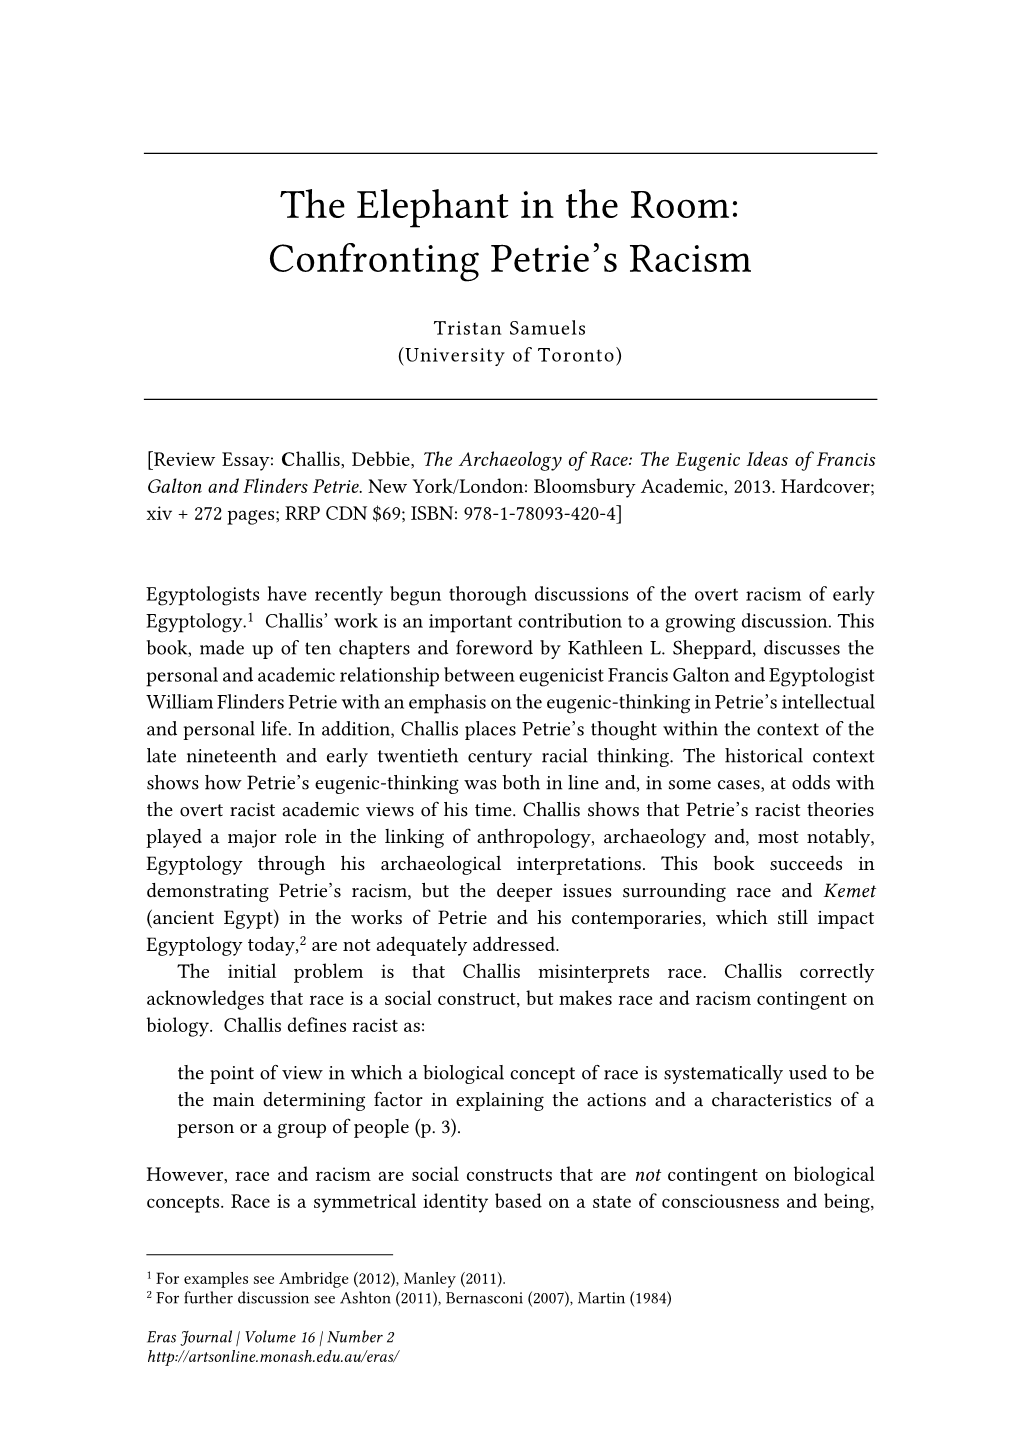 Confronting Petrie's Racism